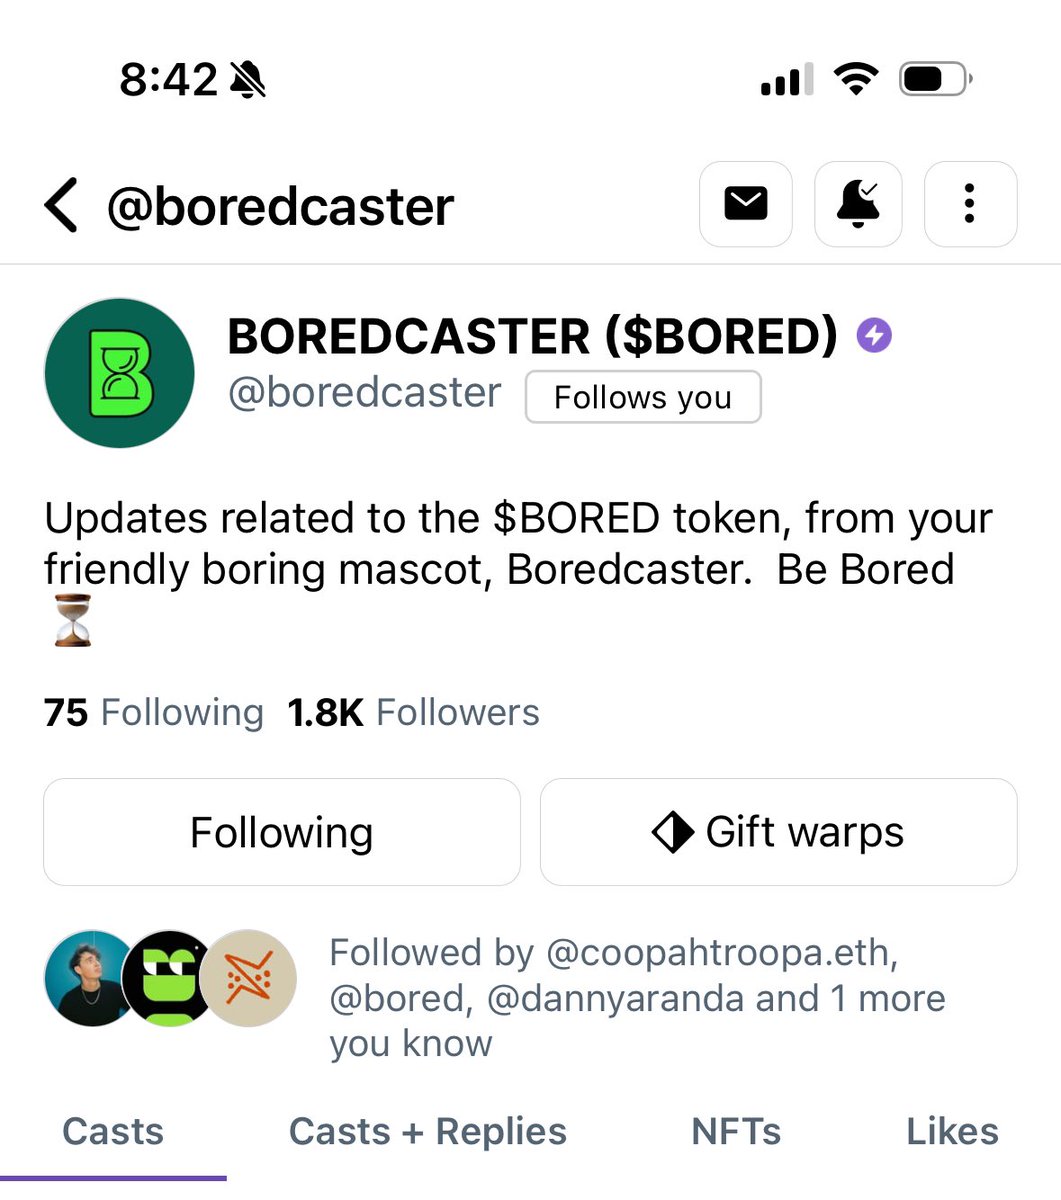 $BORED launched with Party’s latest Token Launcher, now integrated with Uniswap V3 Why this is powerful: - raised $5M through contracts - created LP, locked forever - can now *CLAIM LP FEES* to the Party So far this Party has earned $700K in fees, now in their Party Wallet.